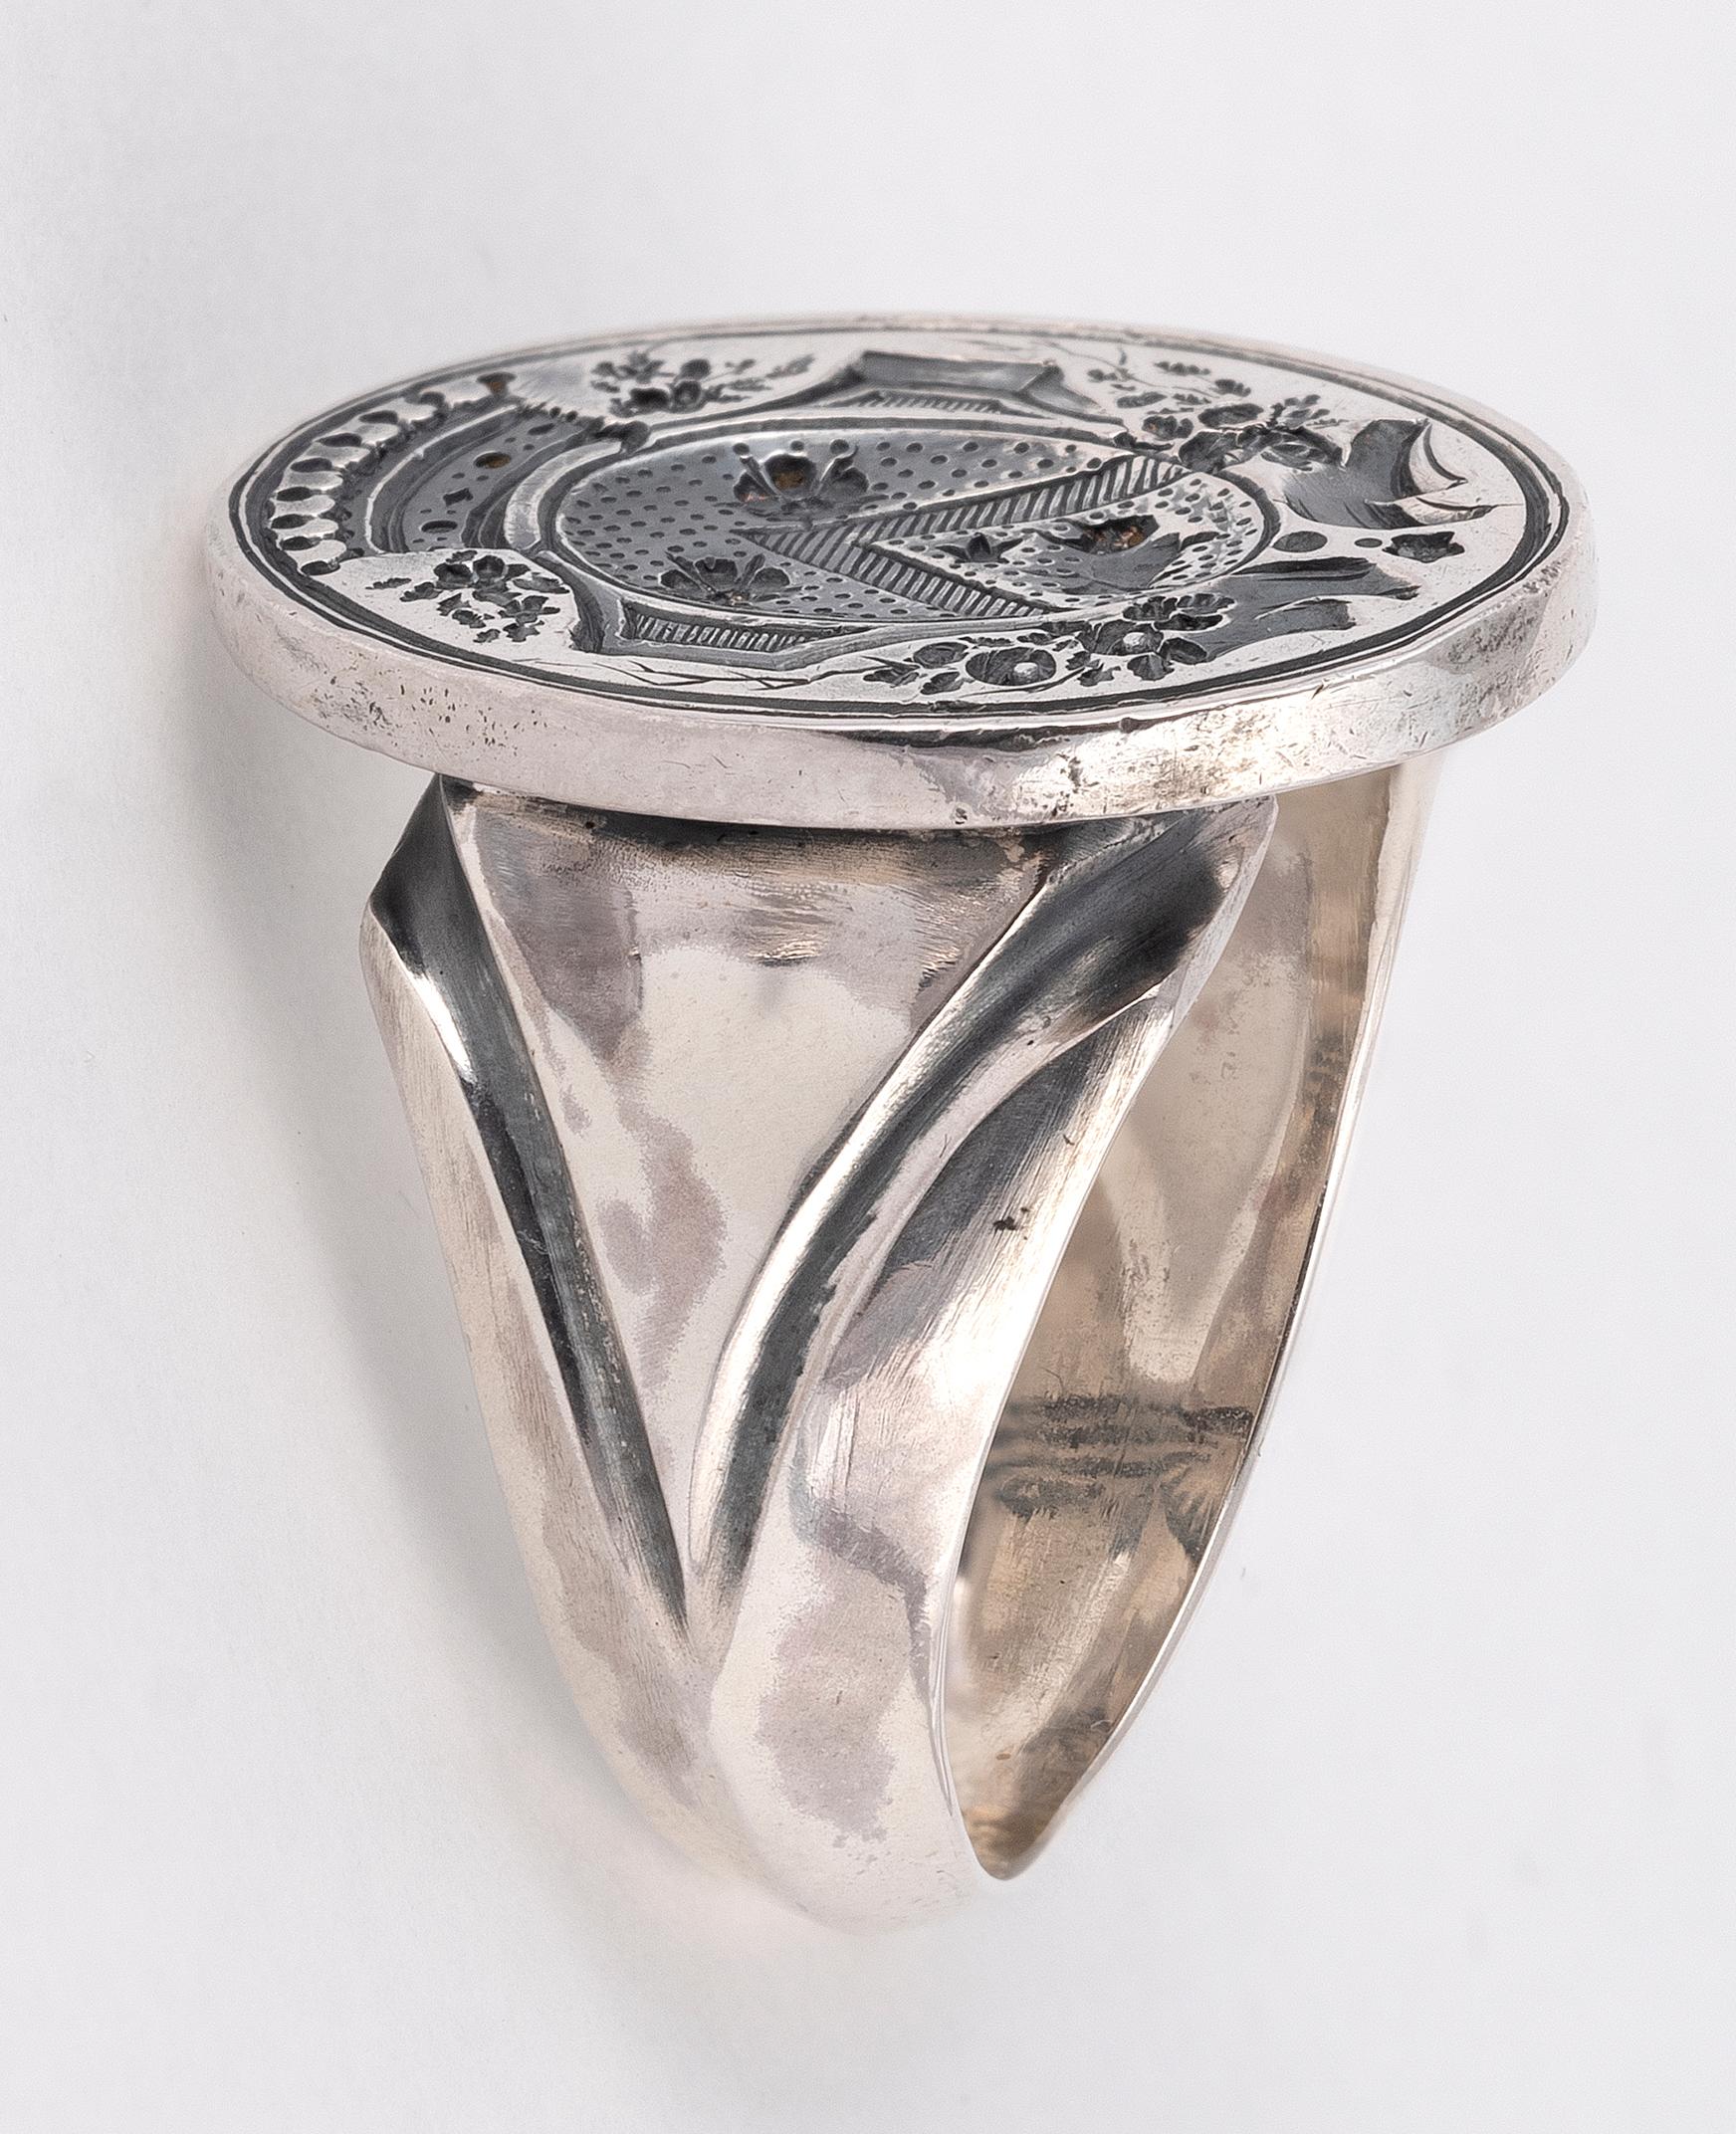 George II Armorial Signet Ring Second Quarter of the 18th Century